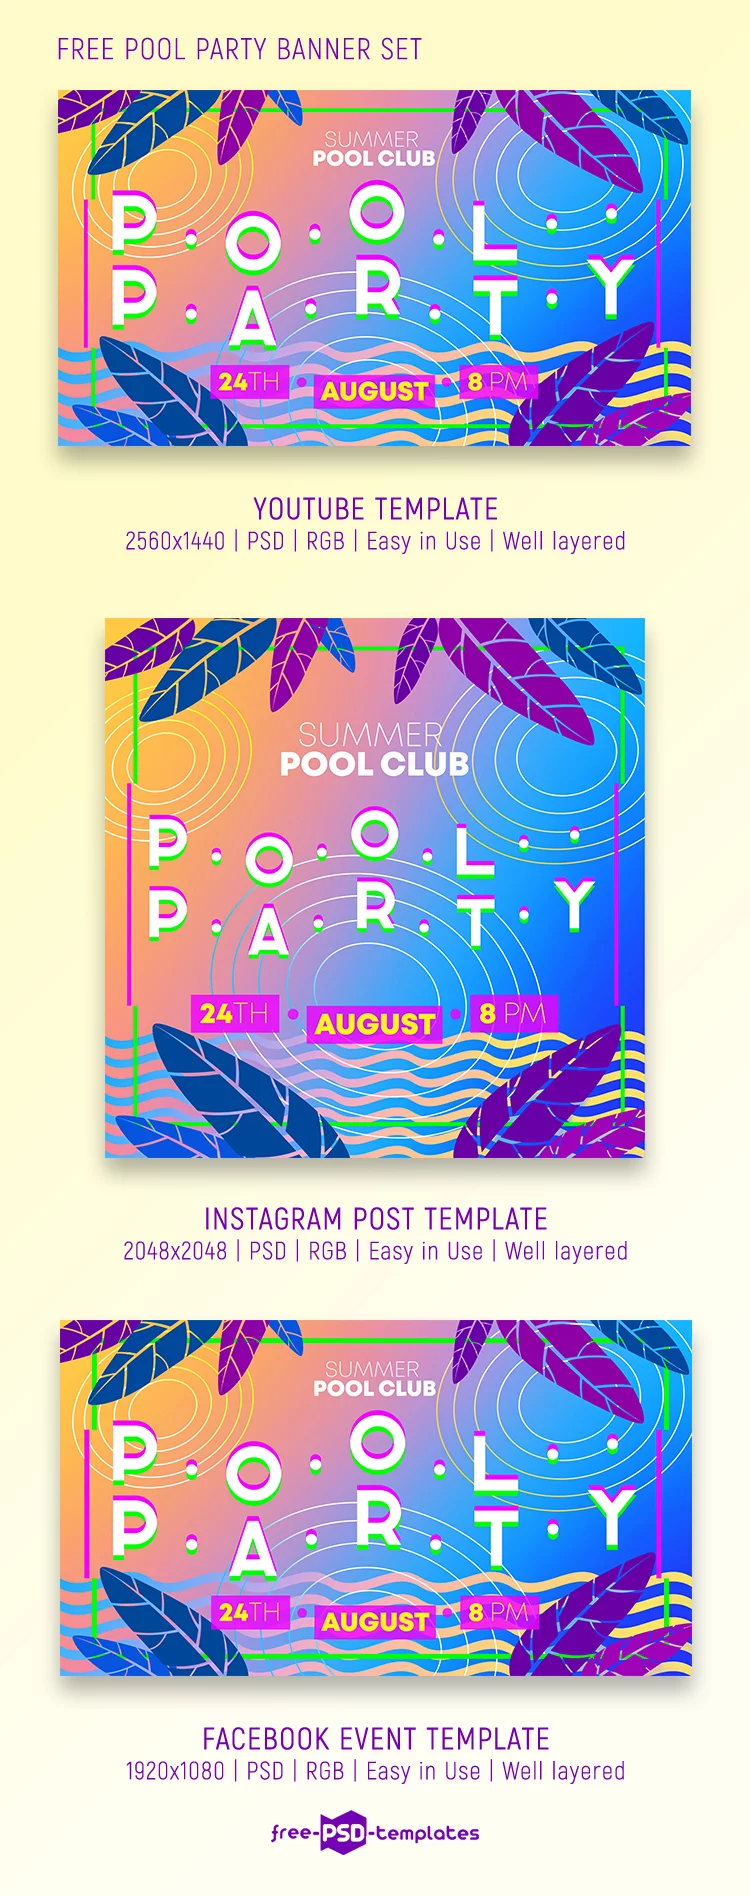 Free Pool Party Banner Set